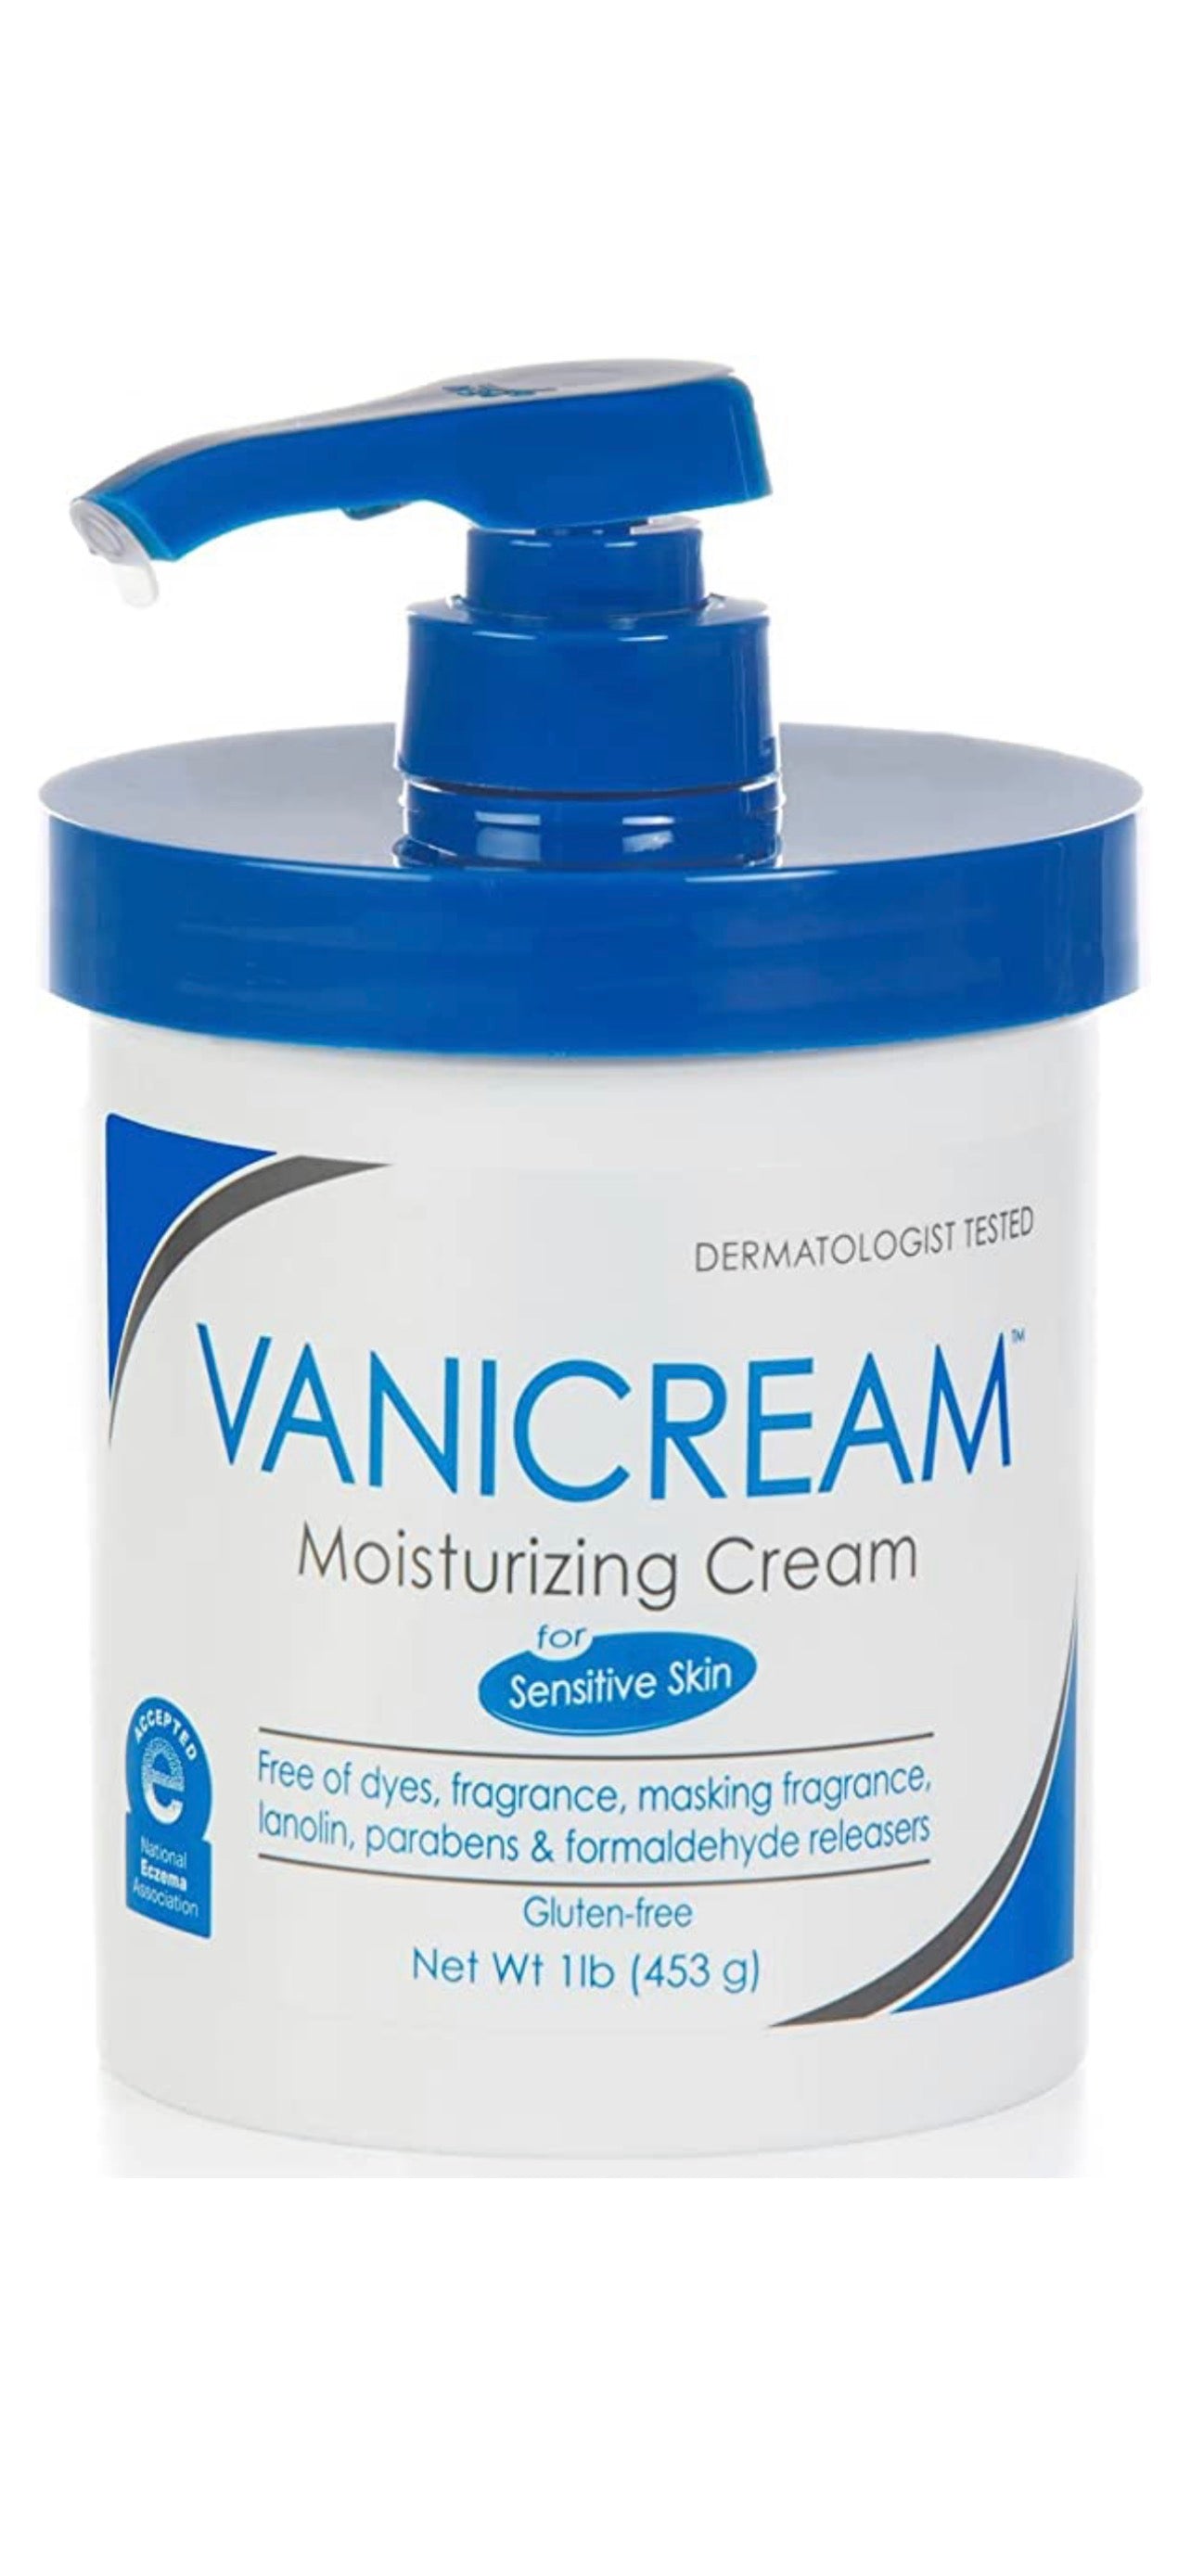 Vanicream Moisturizing Skin Cream with Pump Dispenser - 16 fl oz (1 lb) - Moisturizer Formulated Without Common Irritants for Those with Sensitive Skin Supporting ORCRF.org